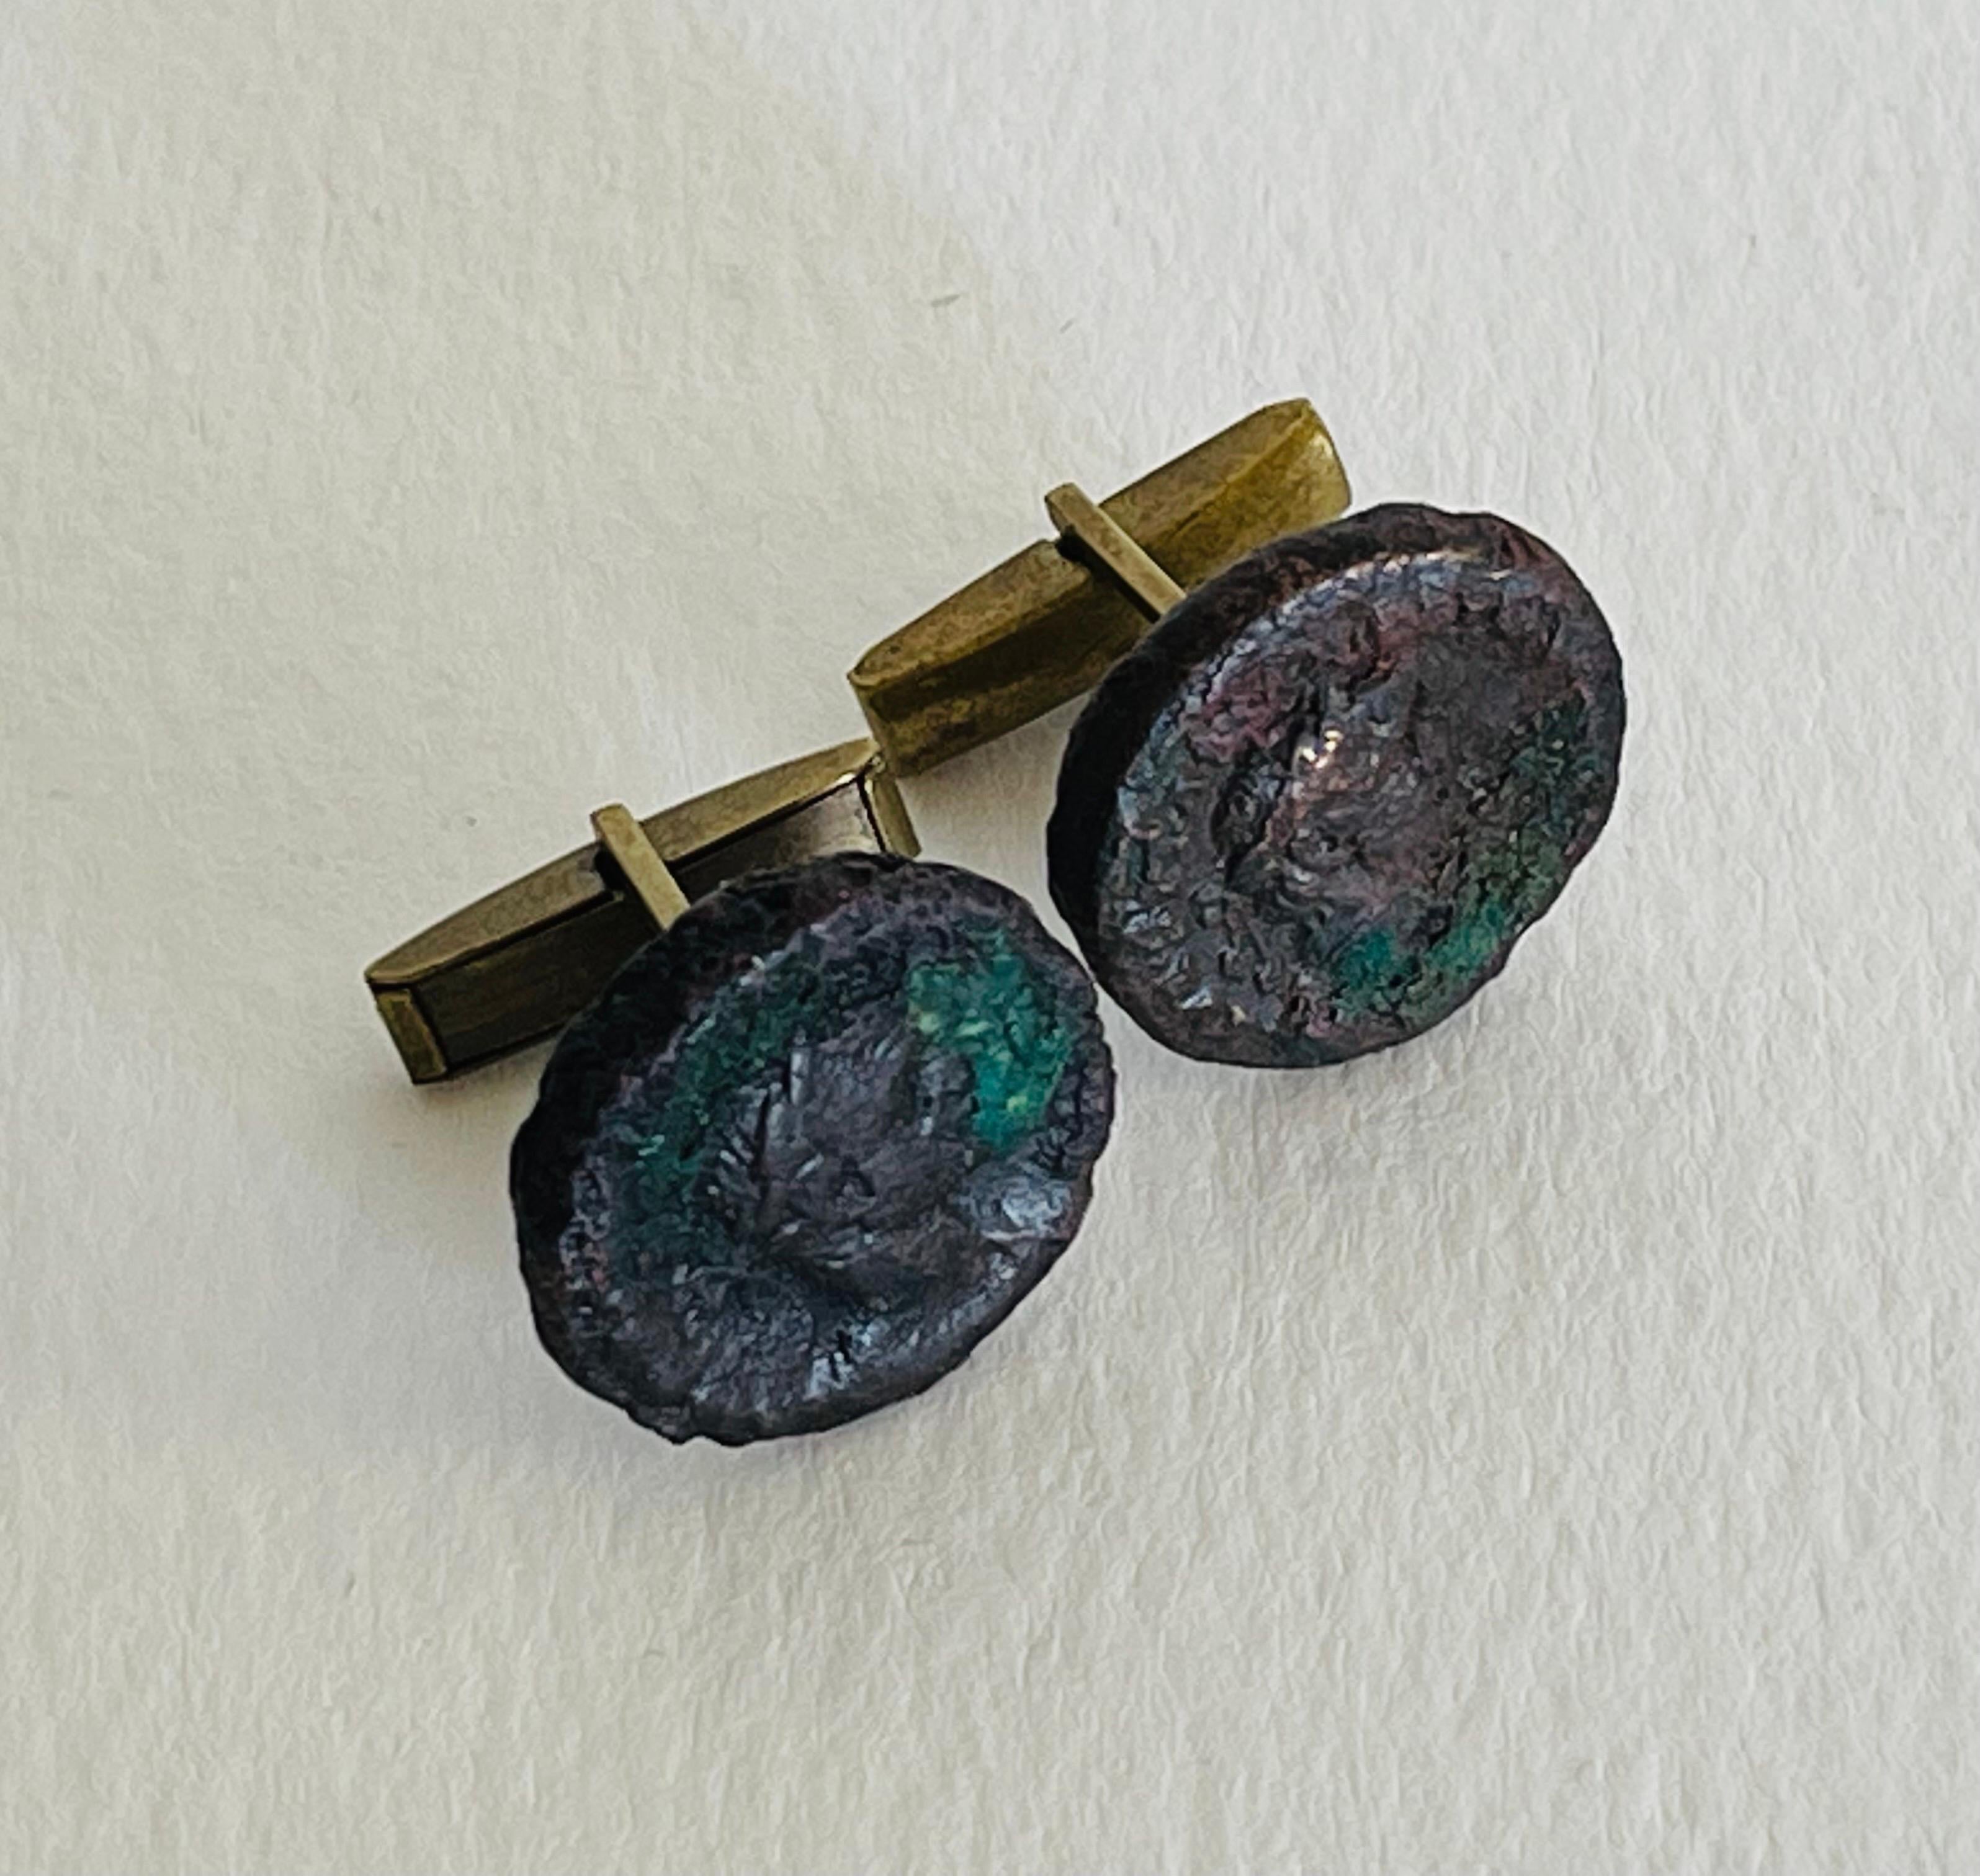 Vintage 1950s pair of men's cufflinks with ancient coins. No marks.